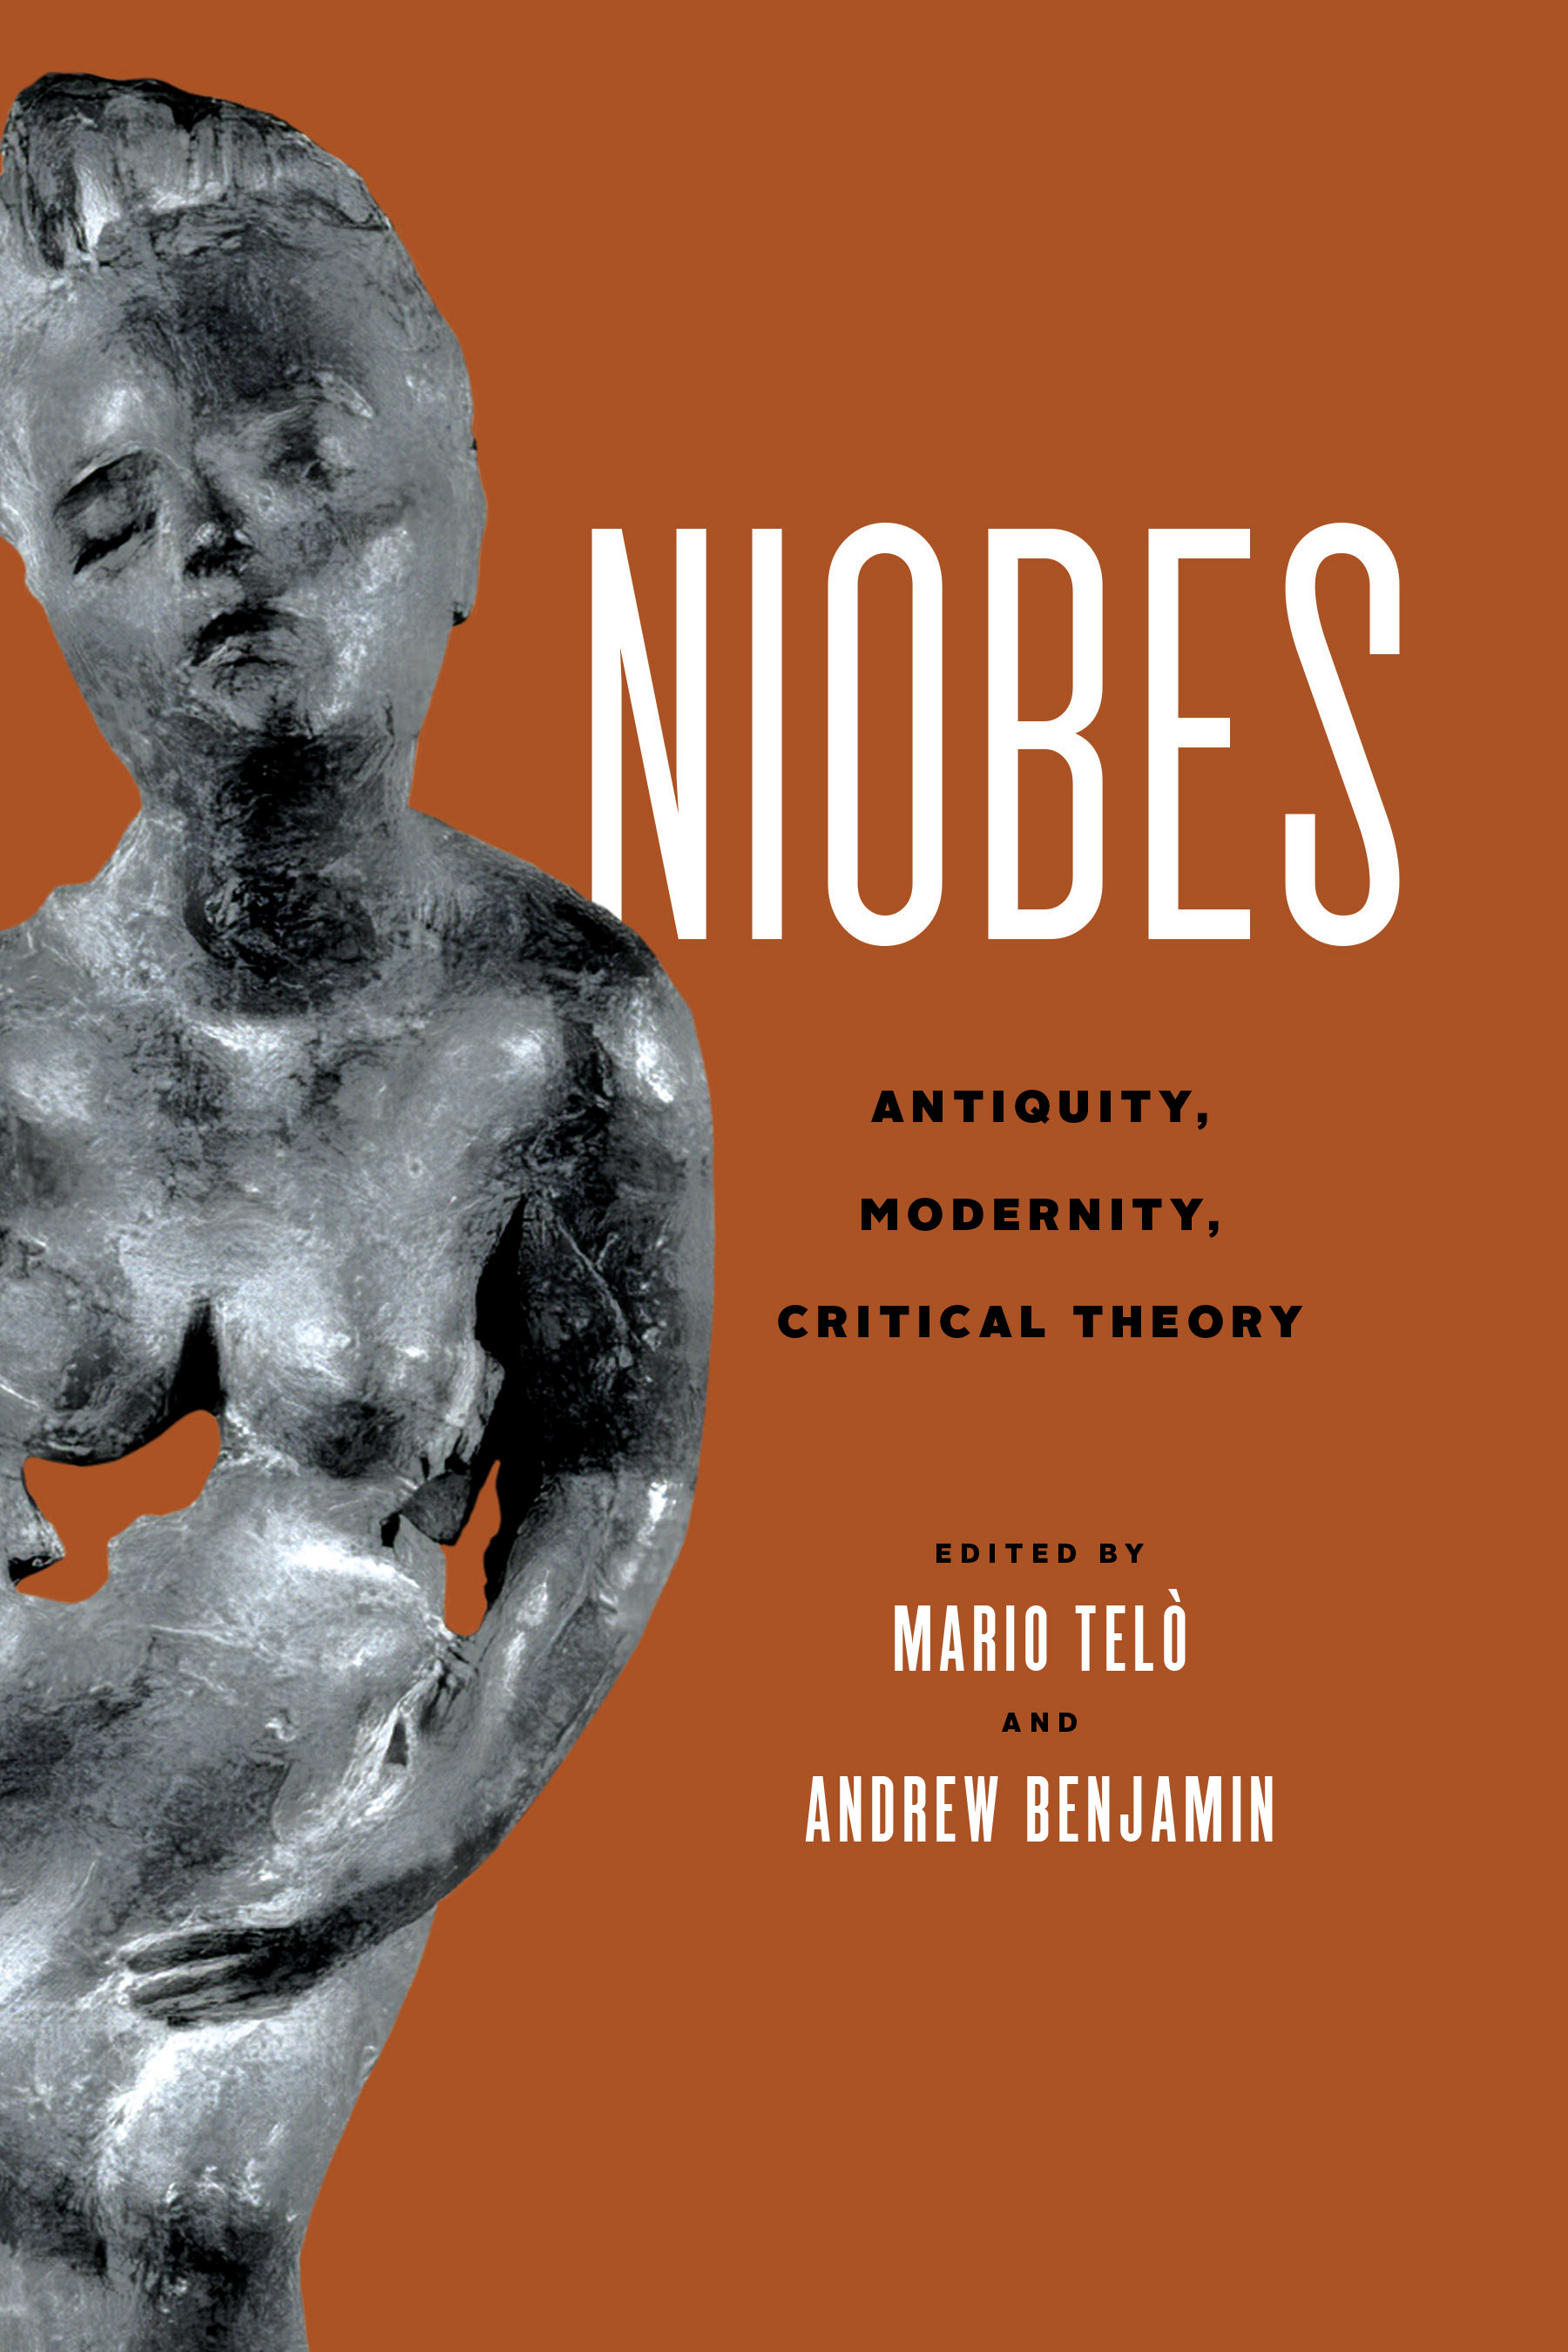 Front cover of Niobes: Antiquity, Modernity, Critical Theory, edited by Mario Telò and Andrew Benjamin, featuring a modern bronze sculture of Niobe.